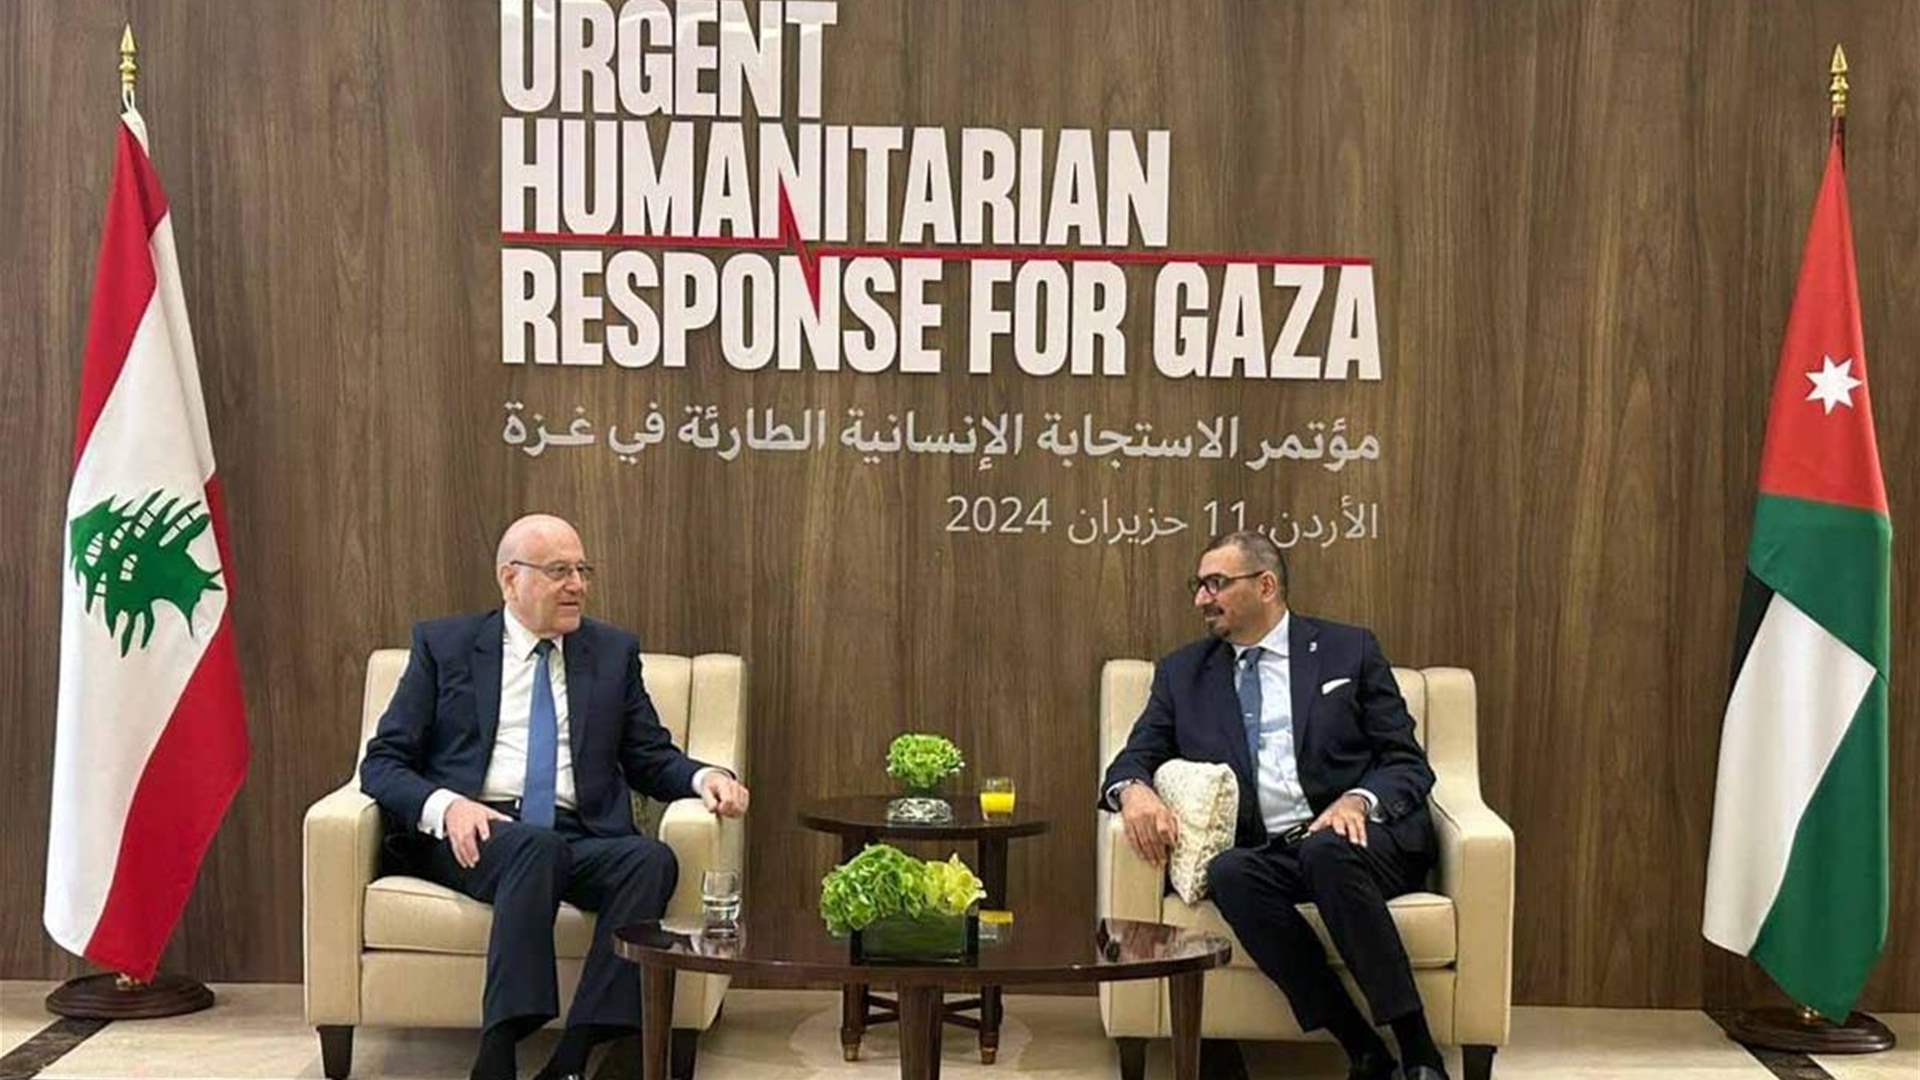 Mikati in Jordan to participate in the &quot;Urgent Humanitarian Response for Gaza&quot; conference